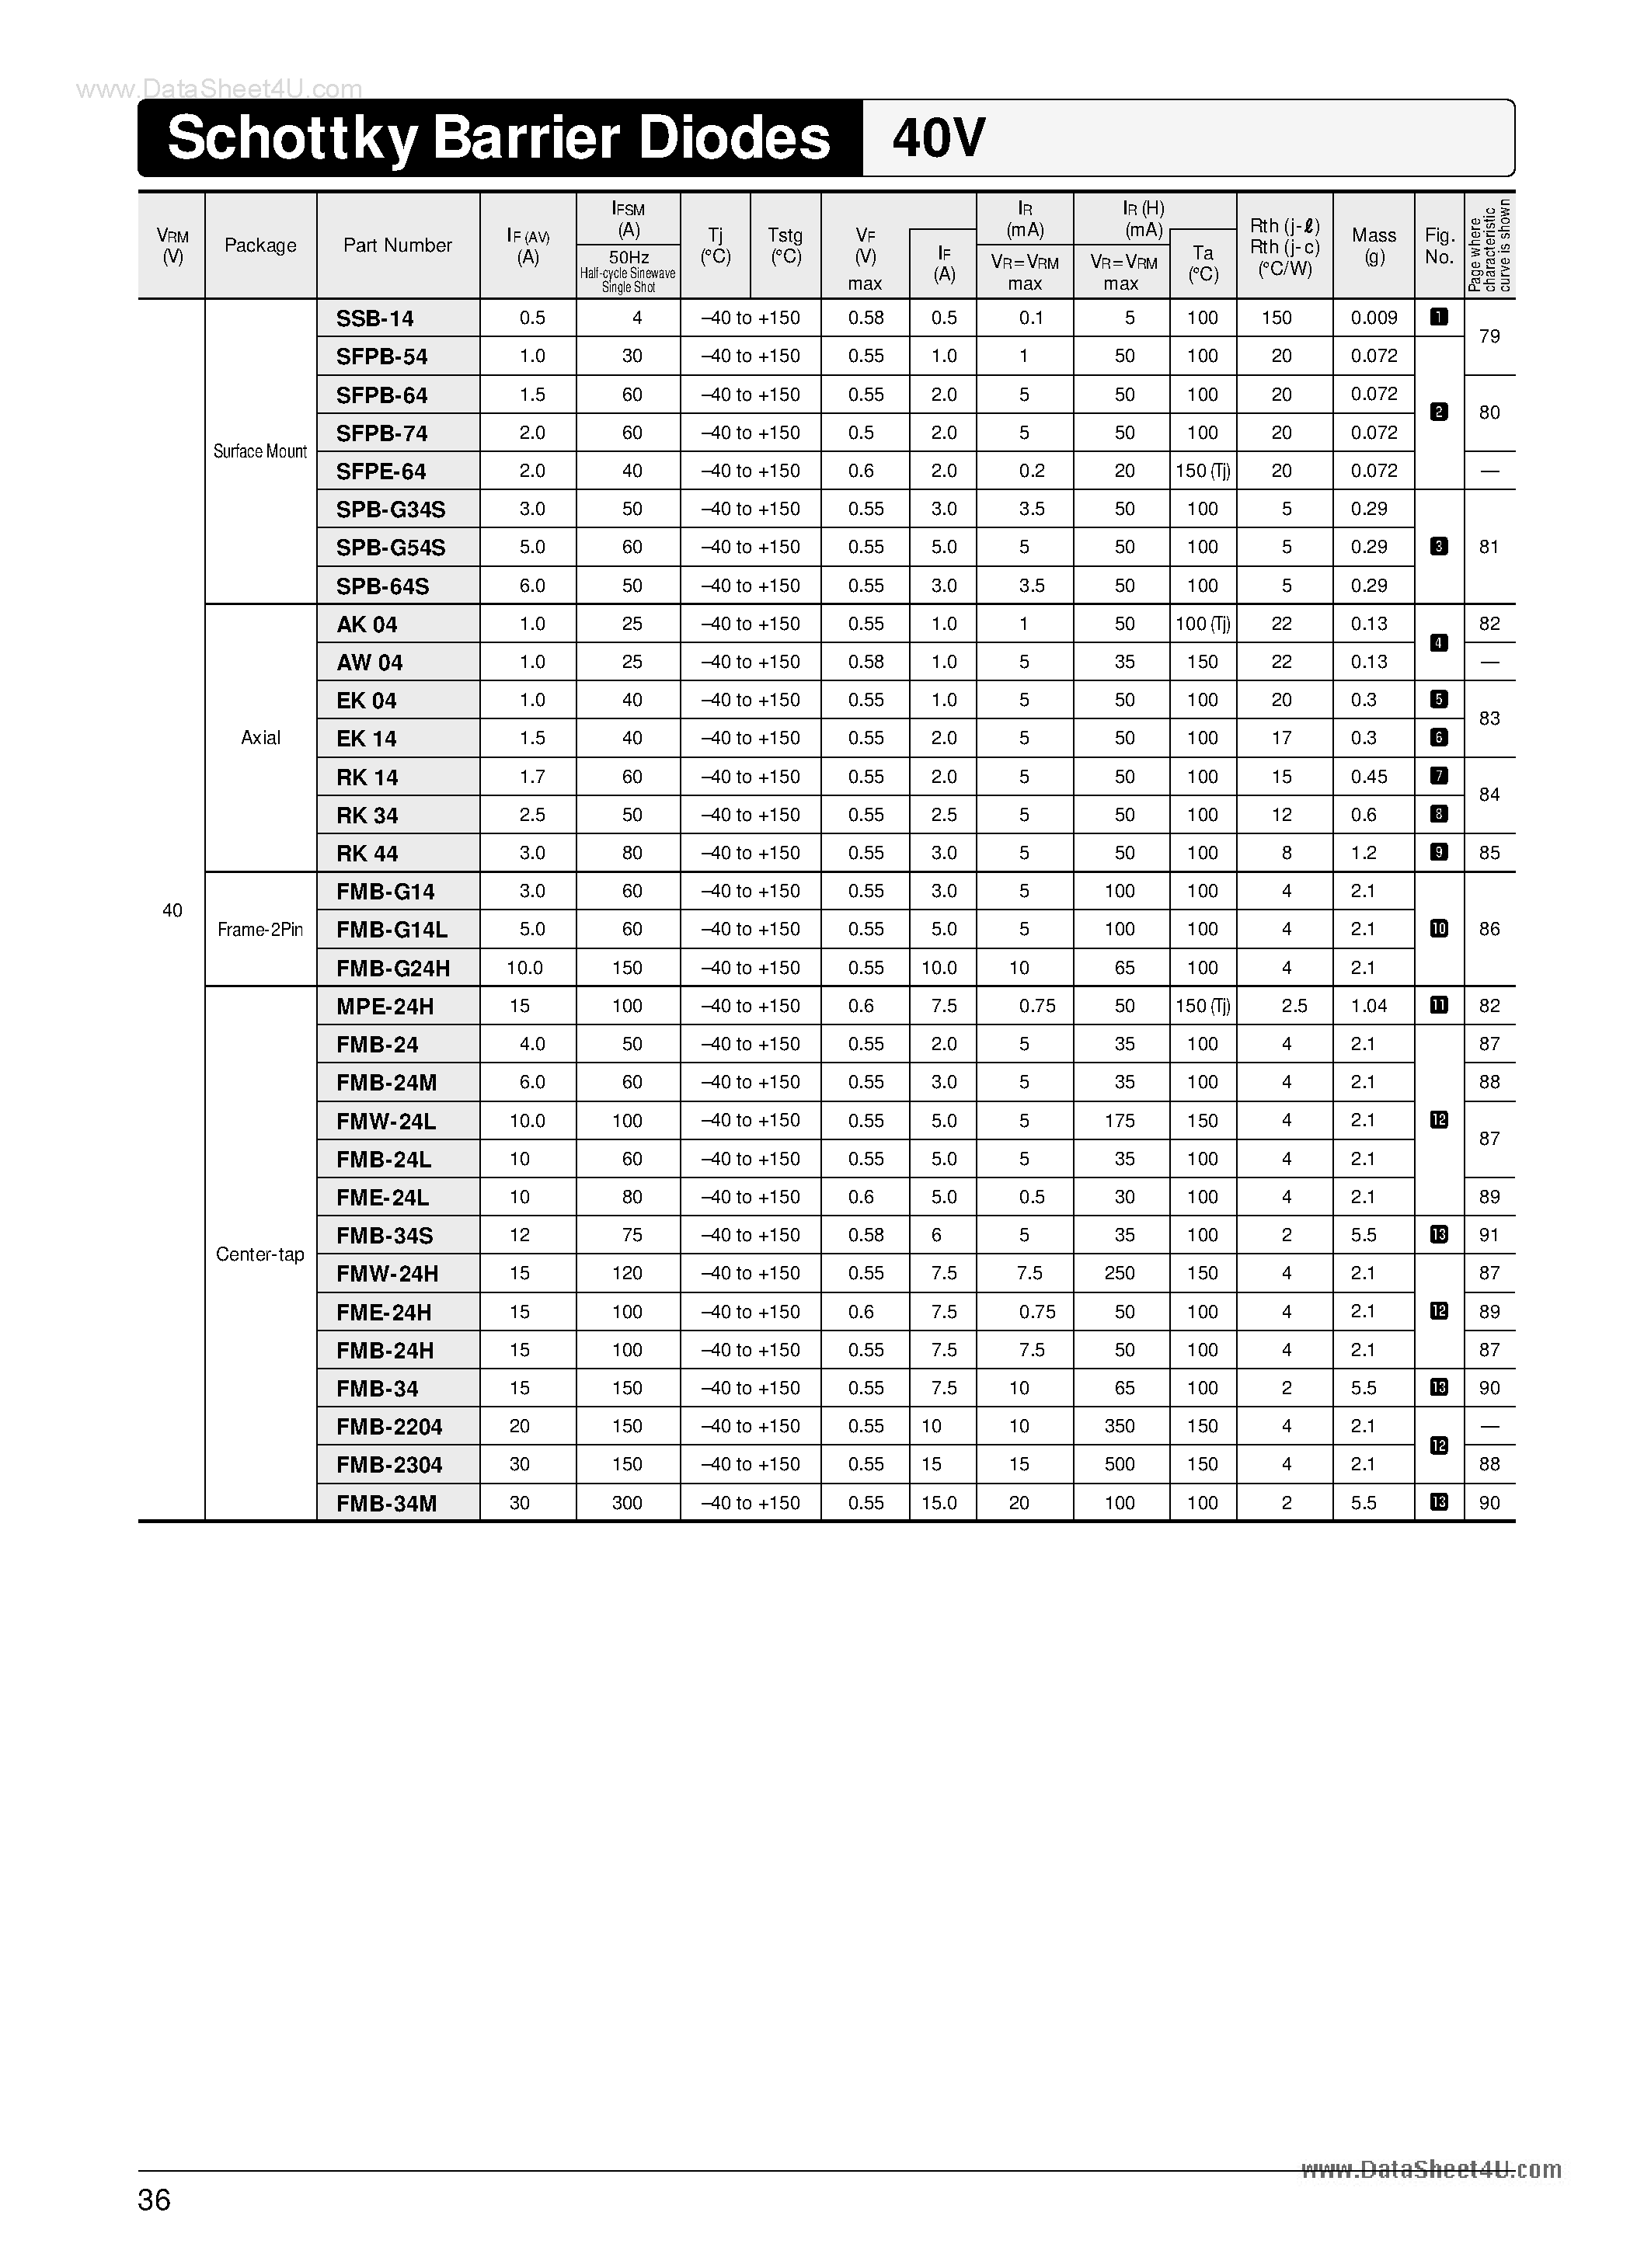 Datasheet FMB-24L - Schottky Barrier Diodes page 1